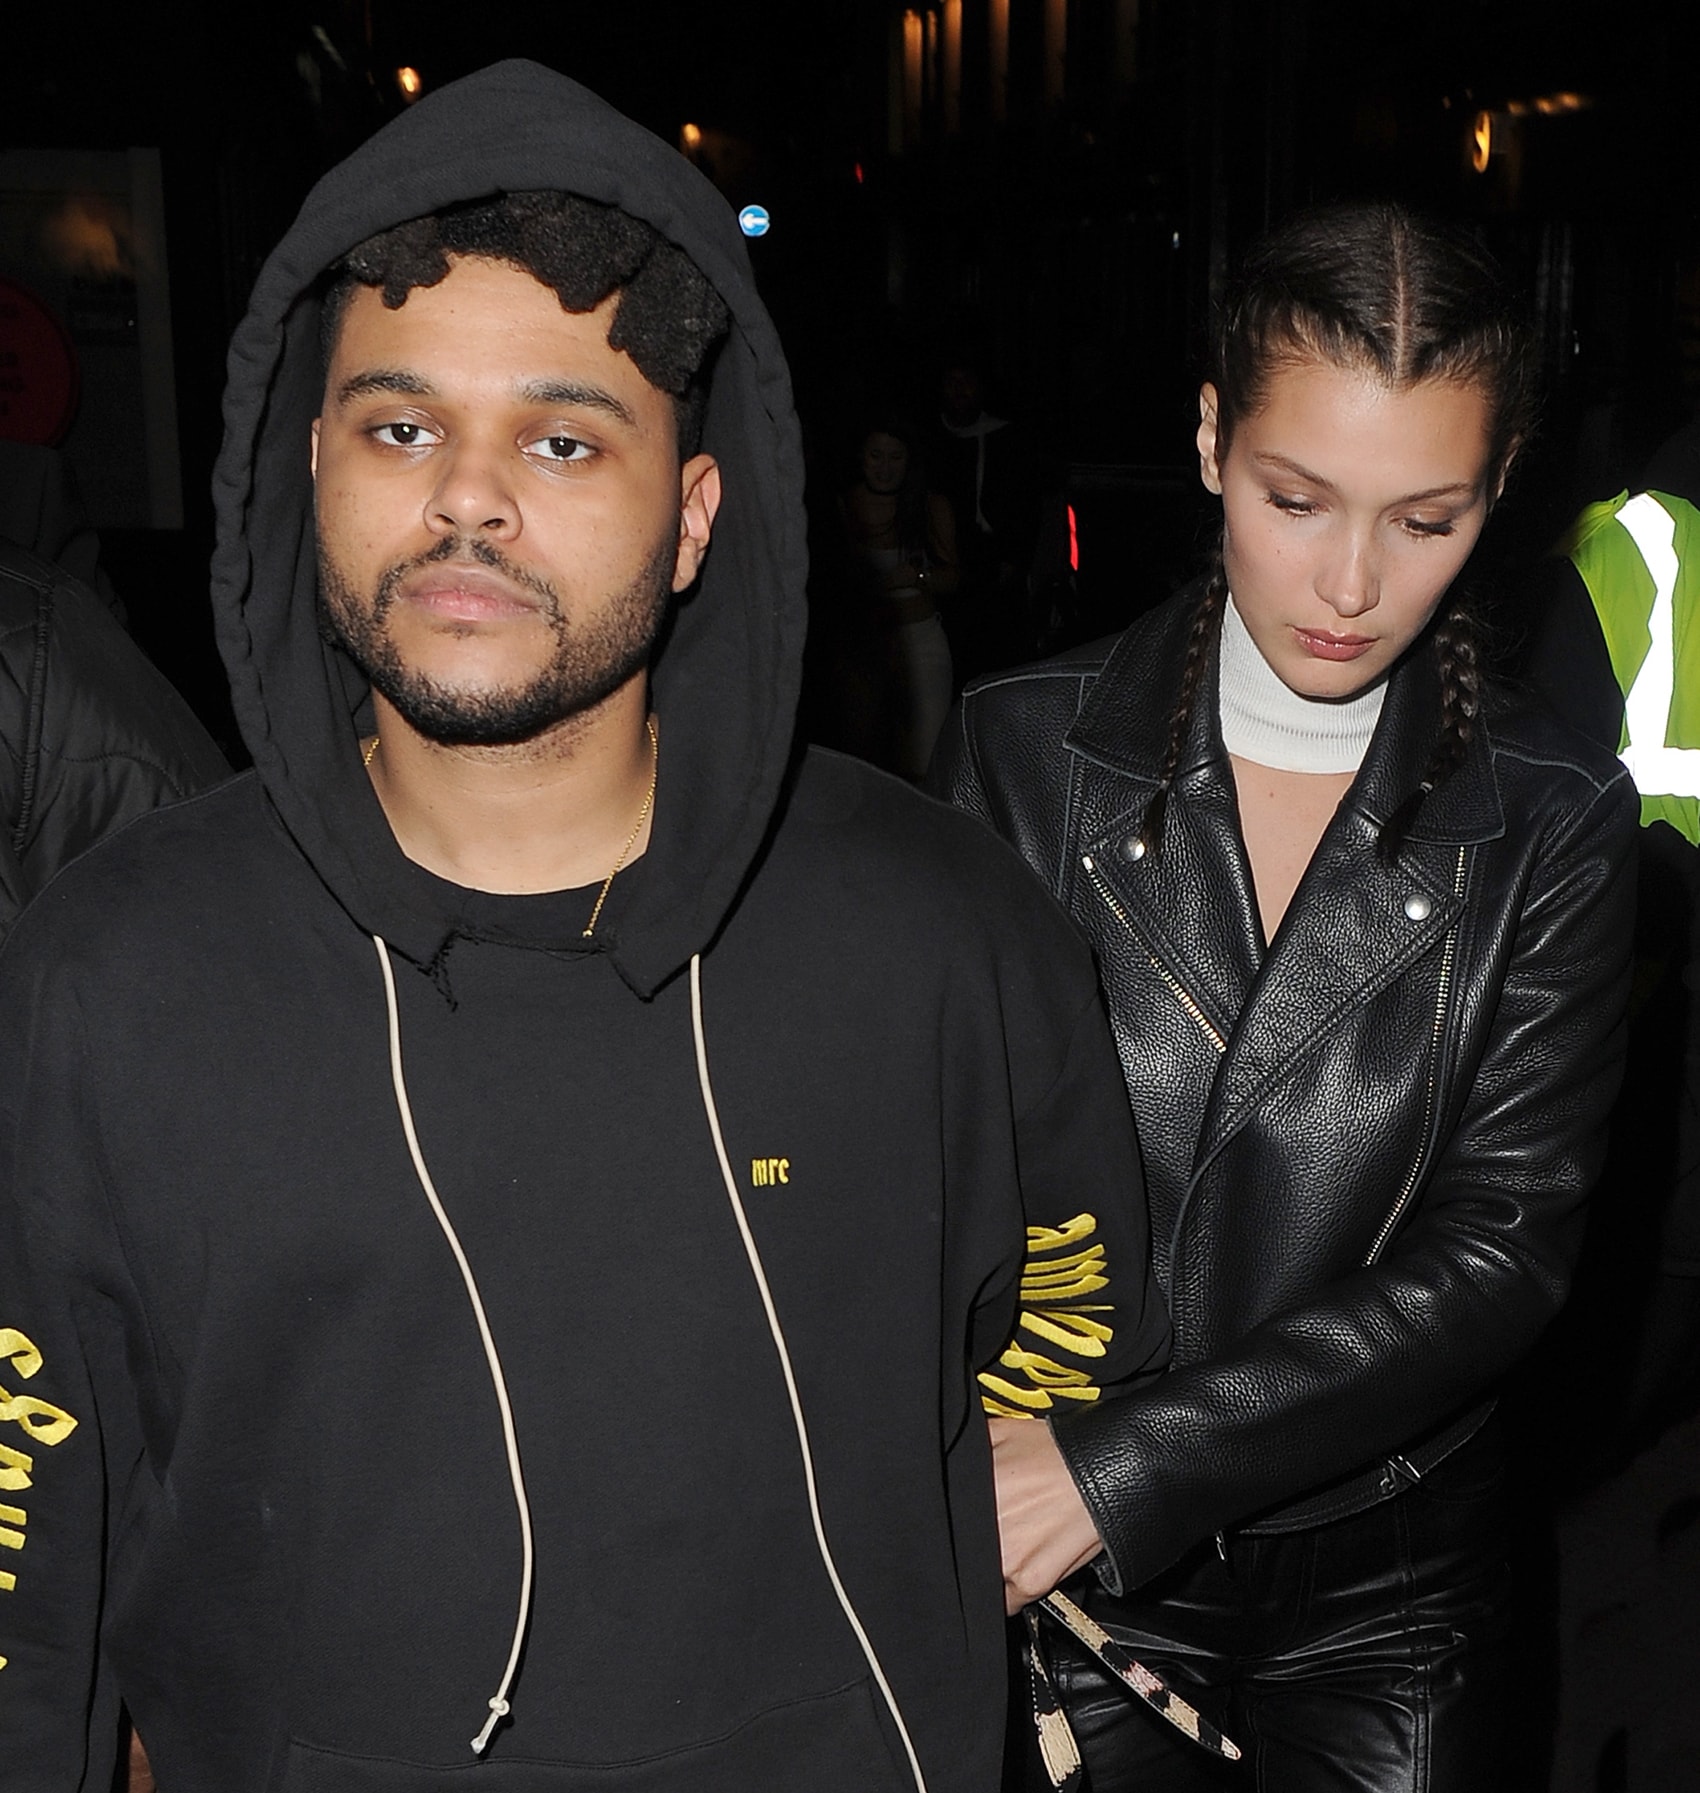 The Weeknd and Bella Hadid started dating after meeting at the Coachella music festival in April 2015